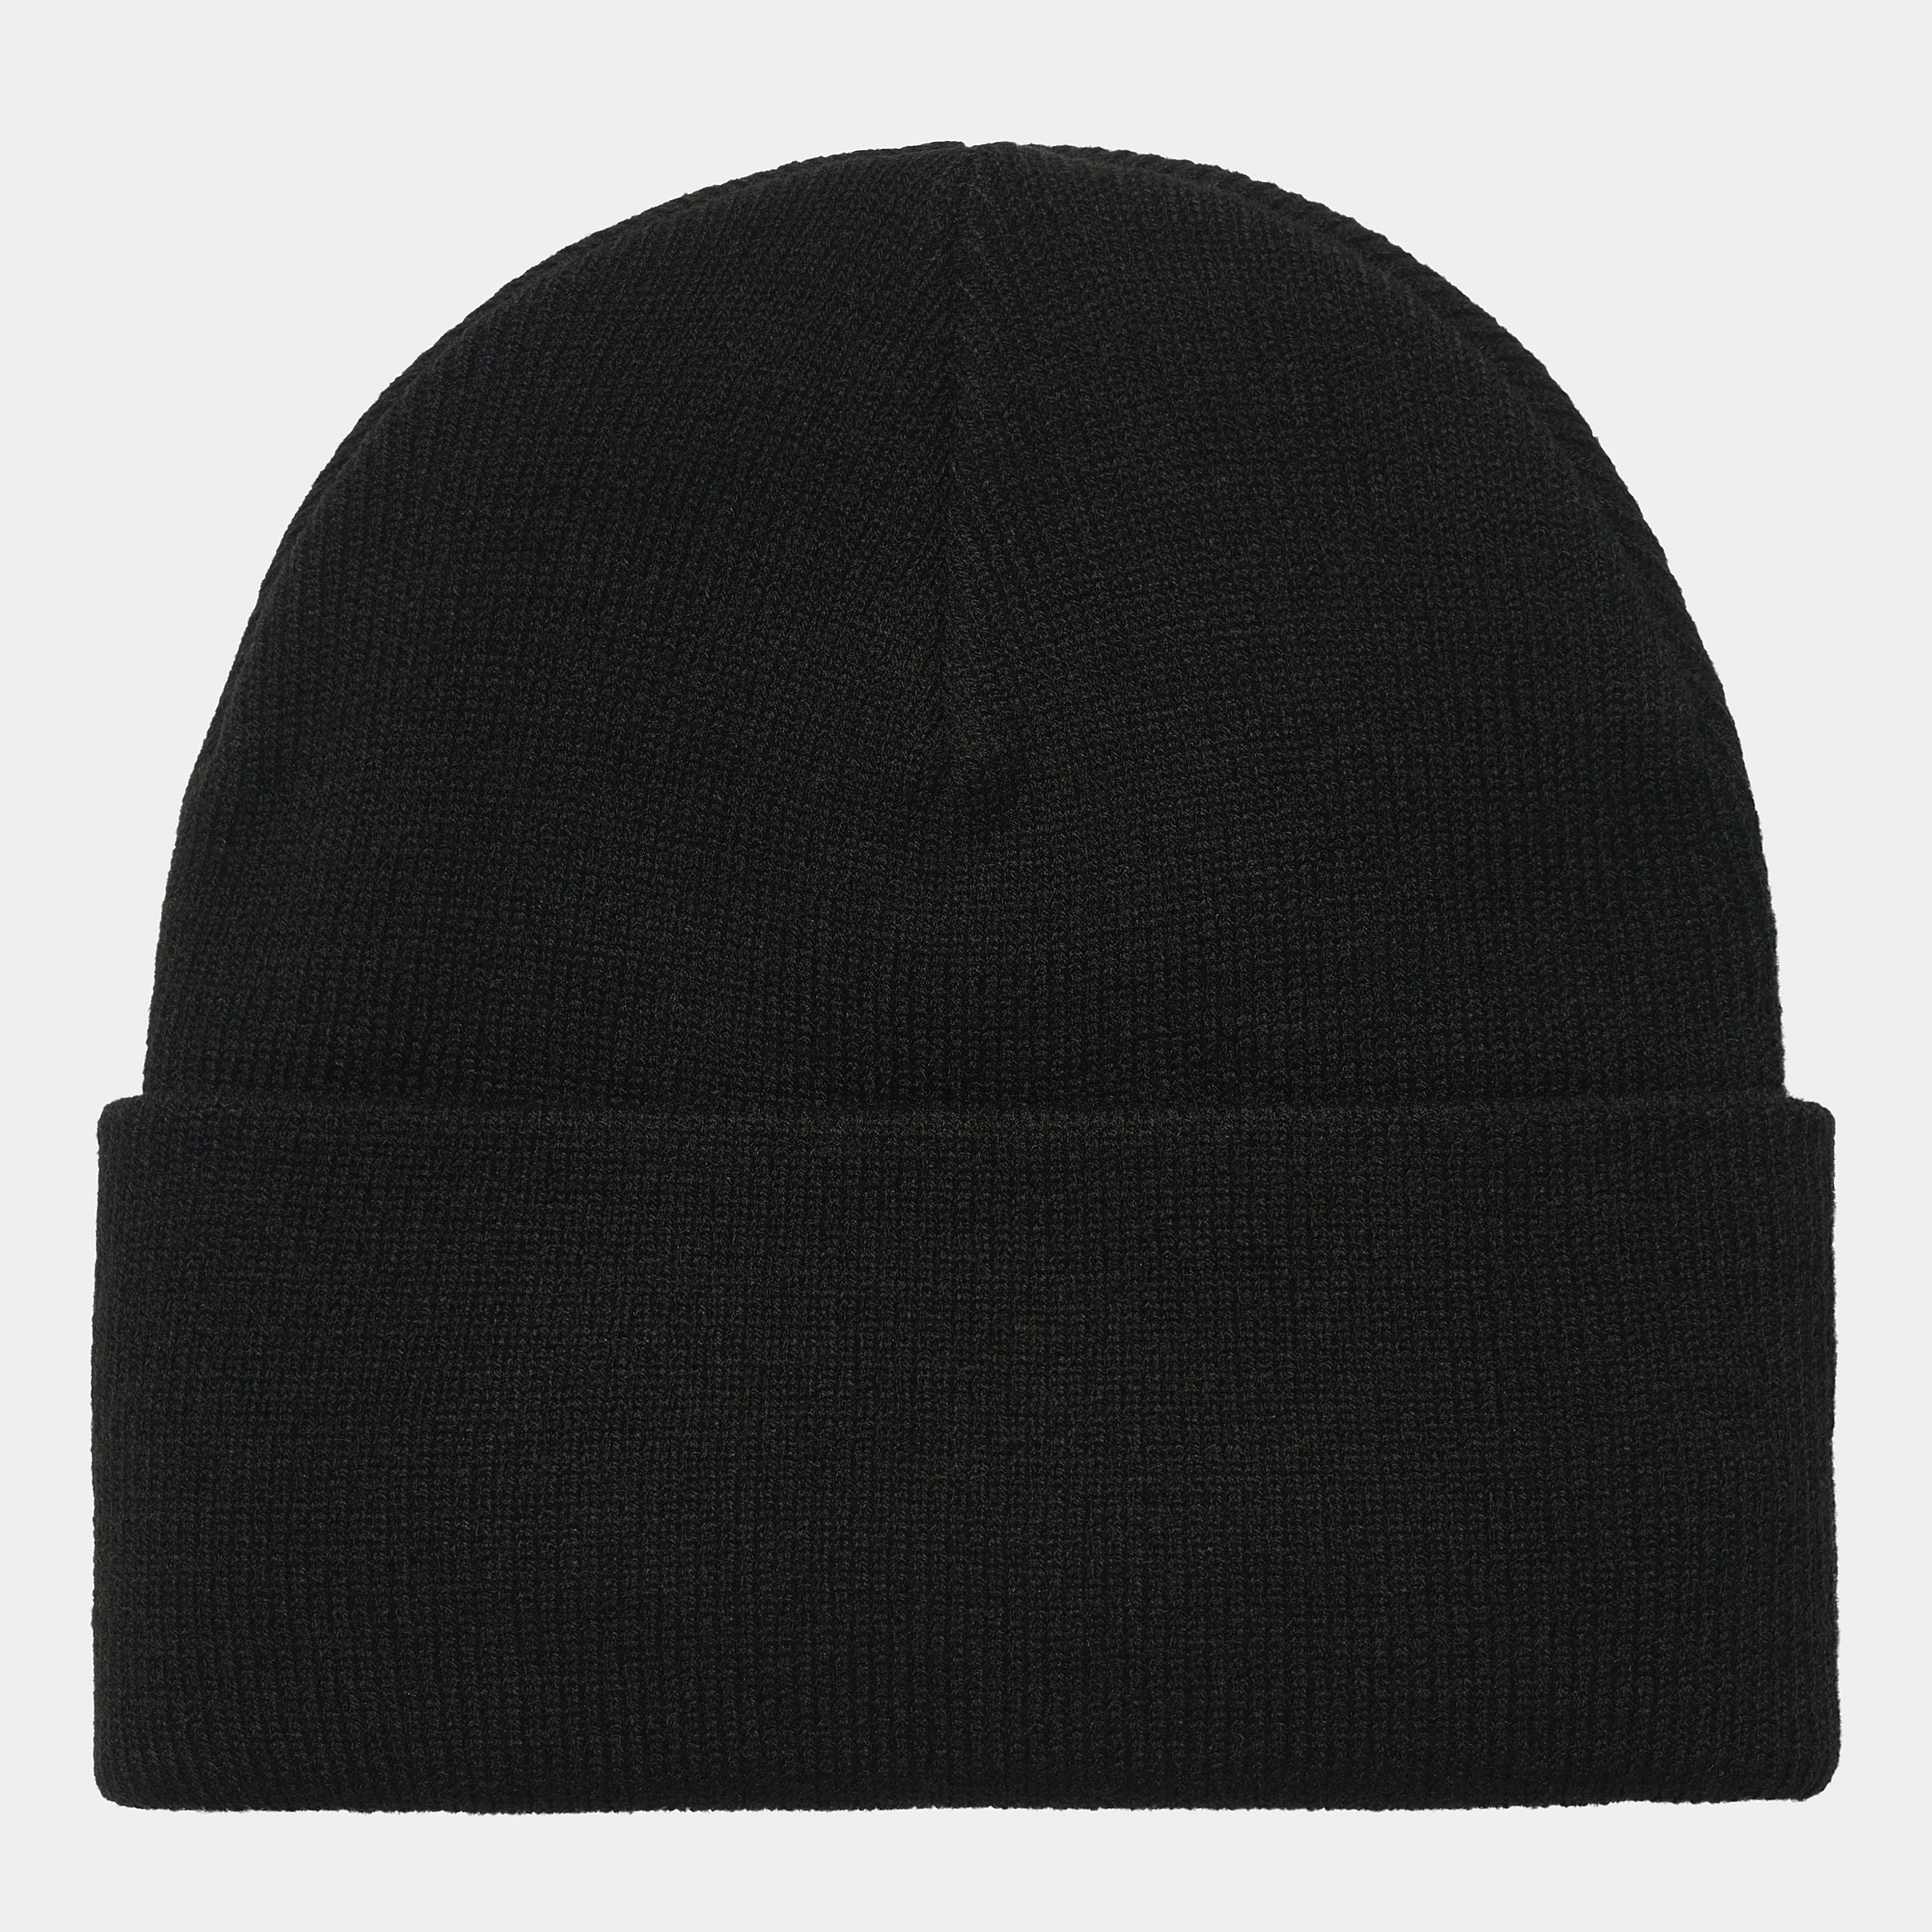 Chase Beanie-Black / Gold-Back view